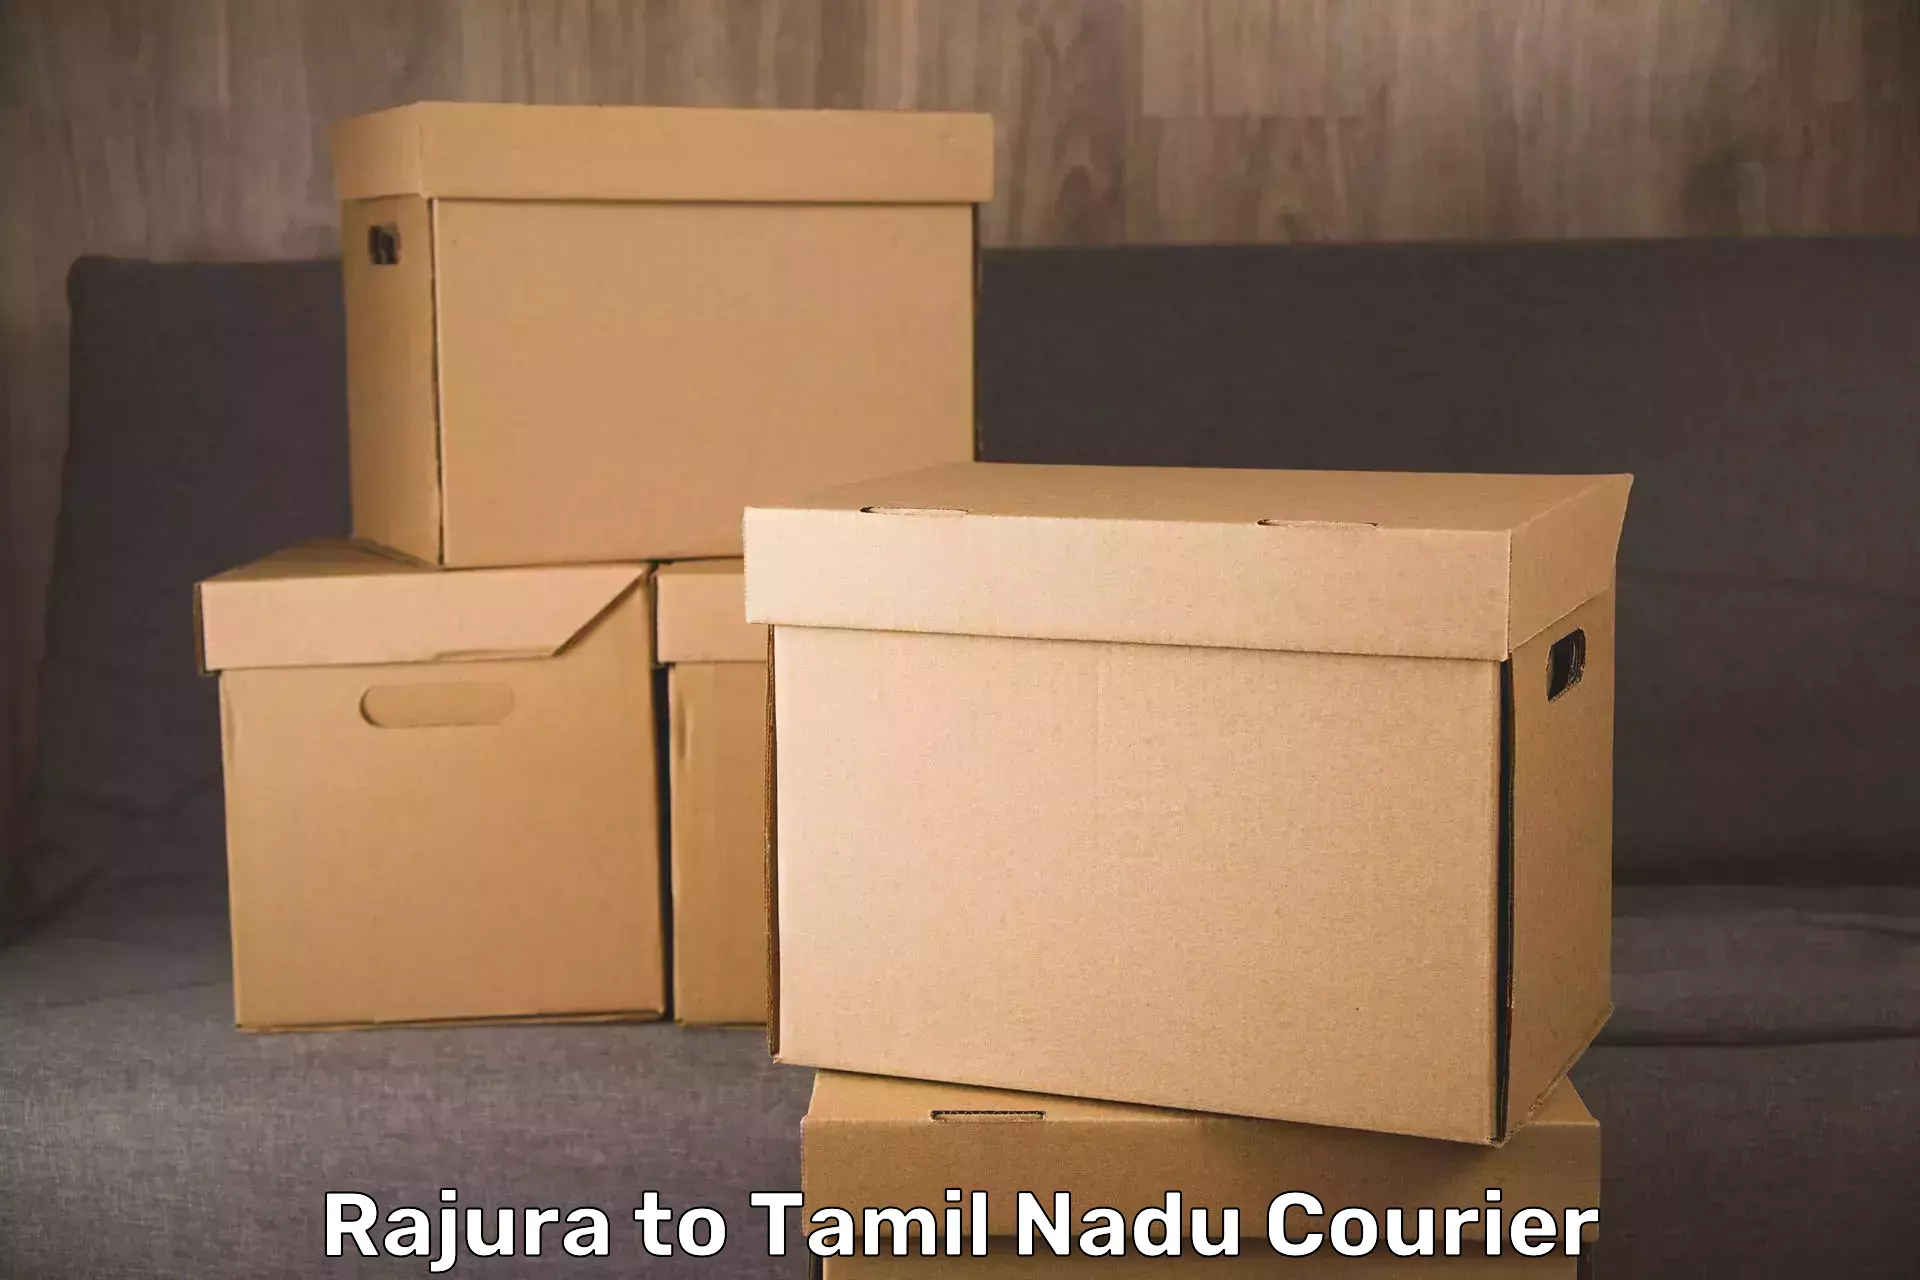 Personal effects shipping Rajura to Ennore Port Chennai